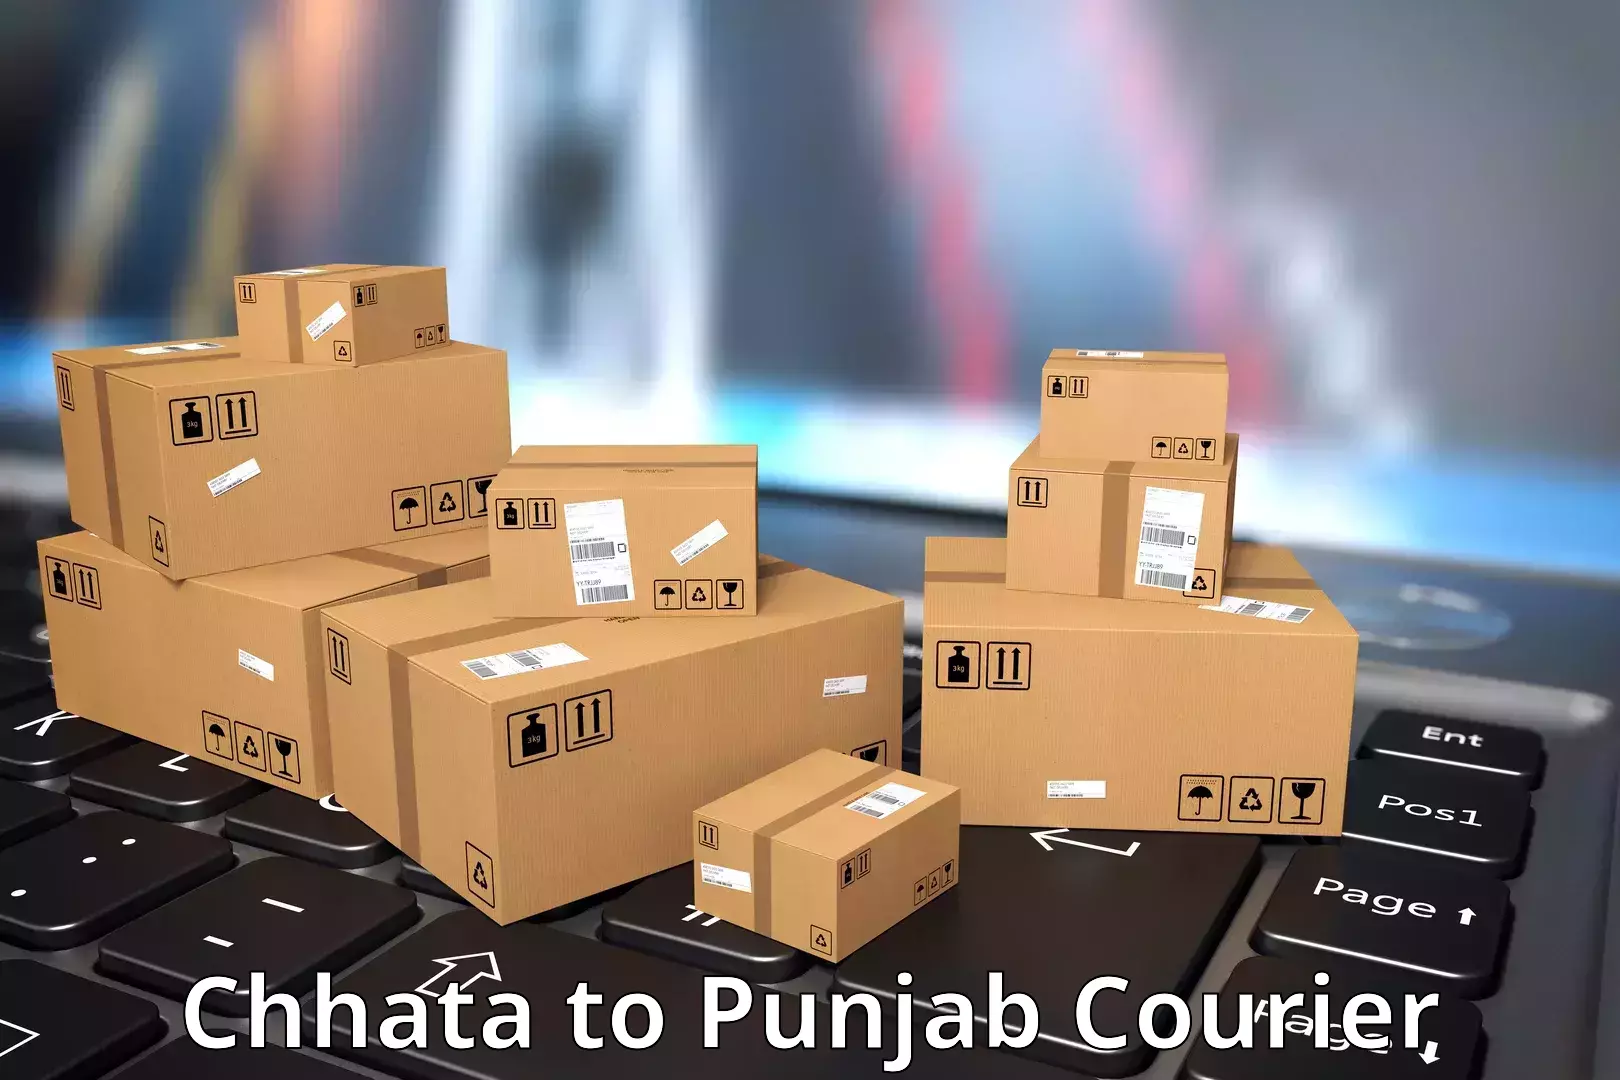 Medical delivery services Chhata to Punjab